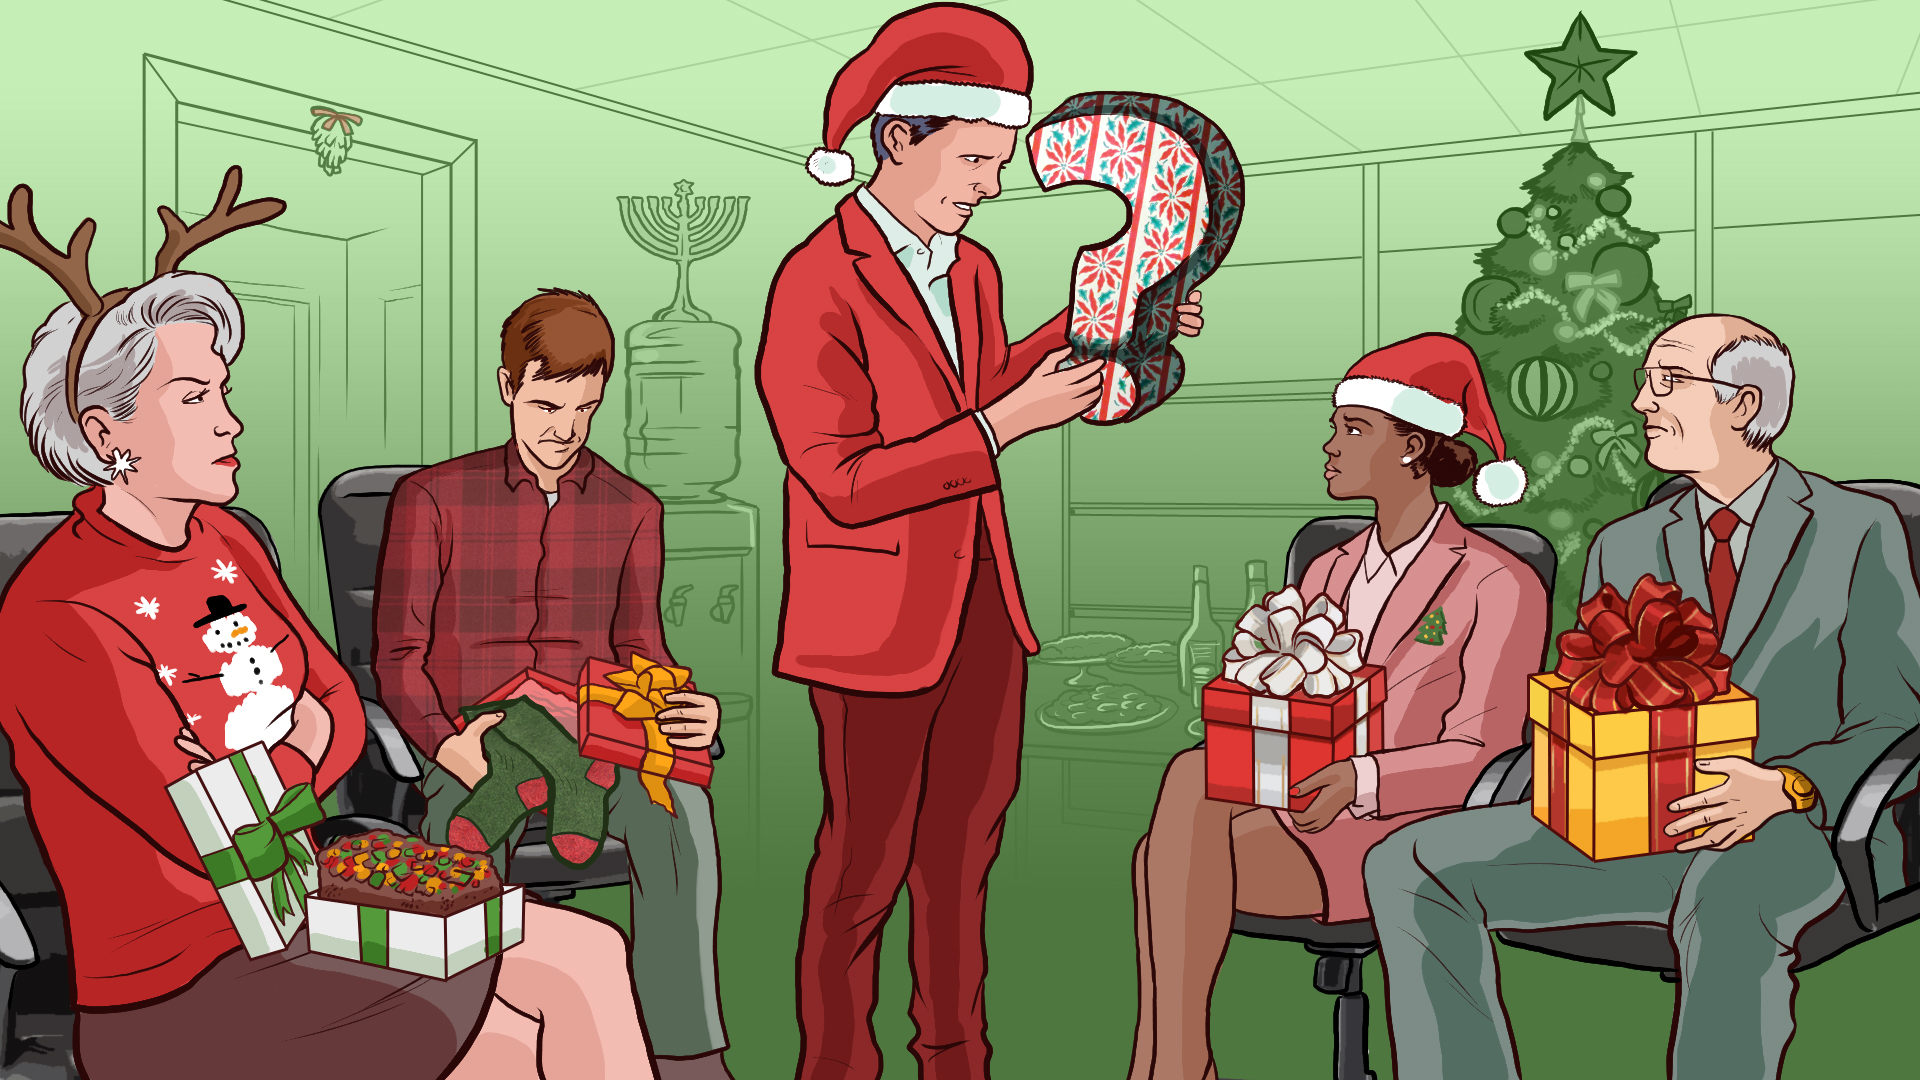 A Don't-Get-Fired Guide to Exchanging Gifts at Work